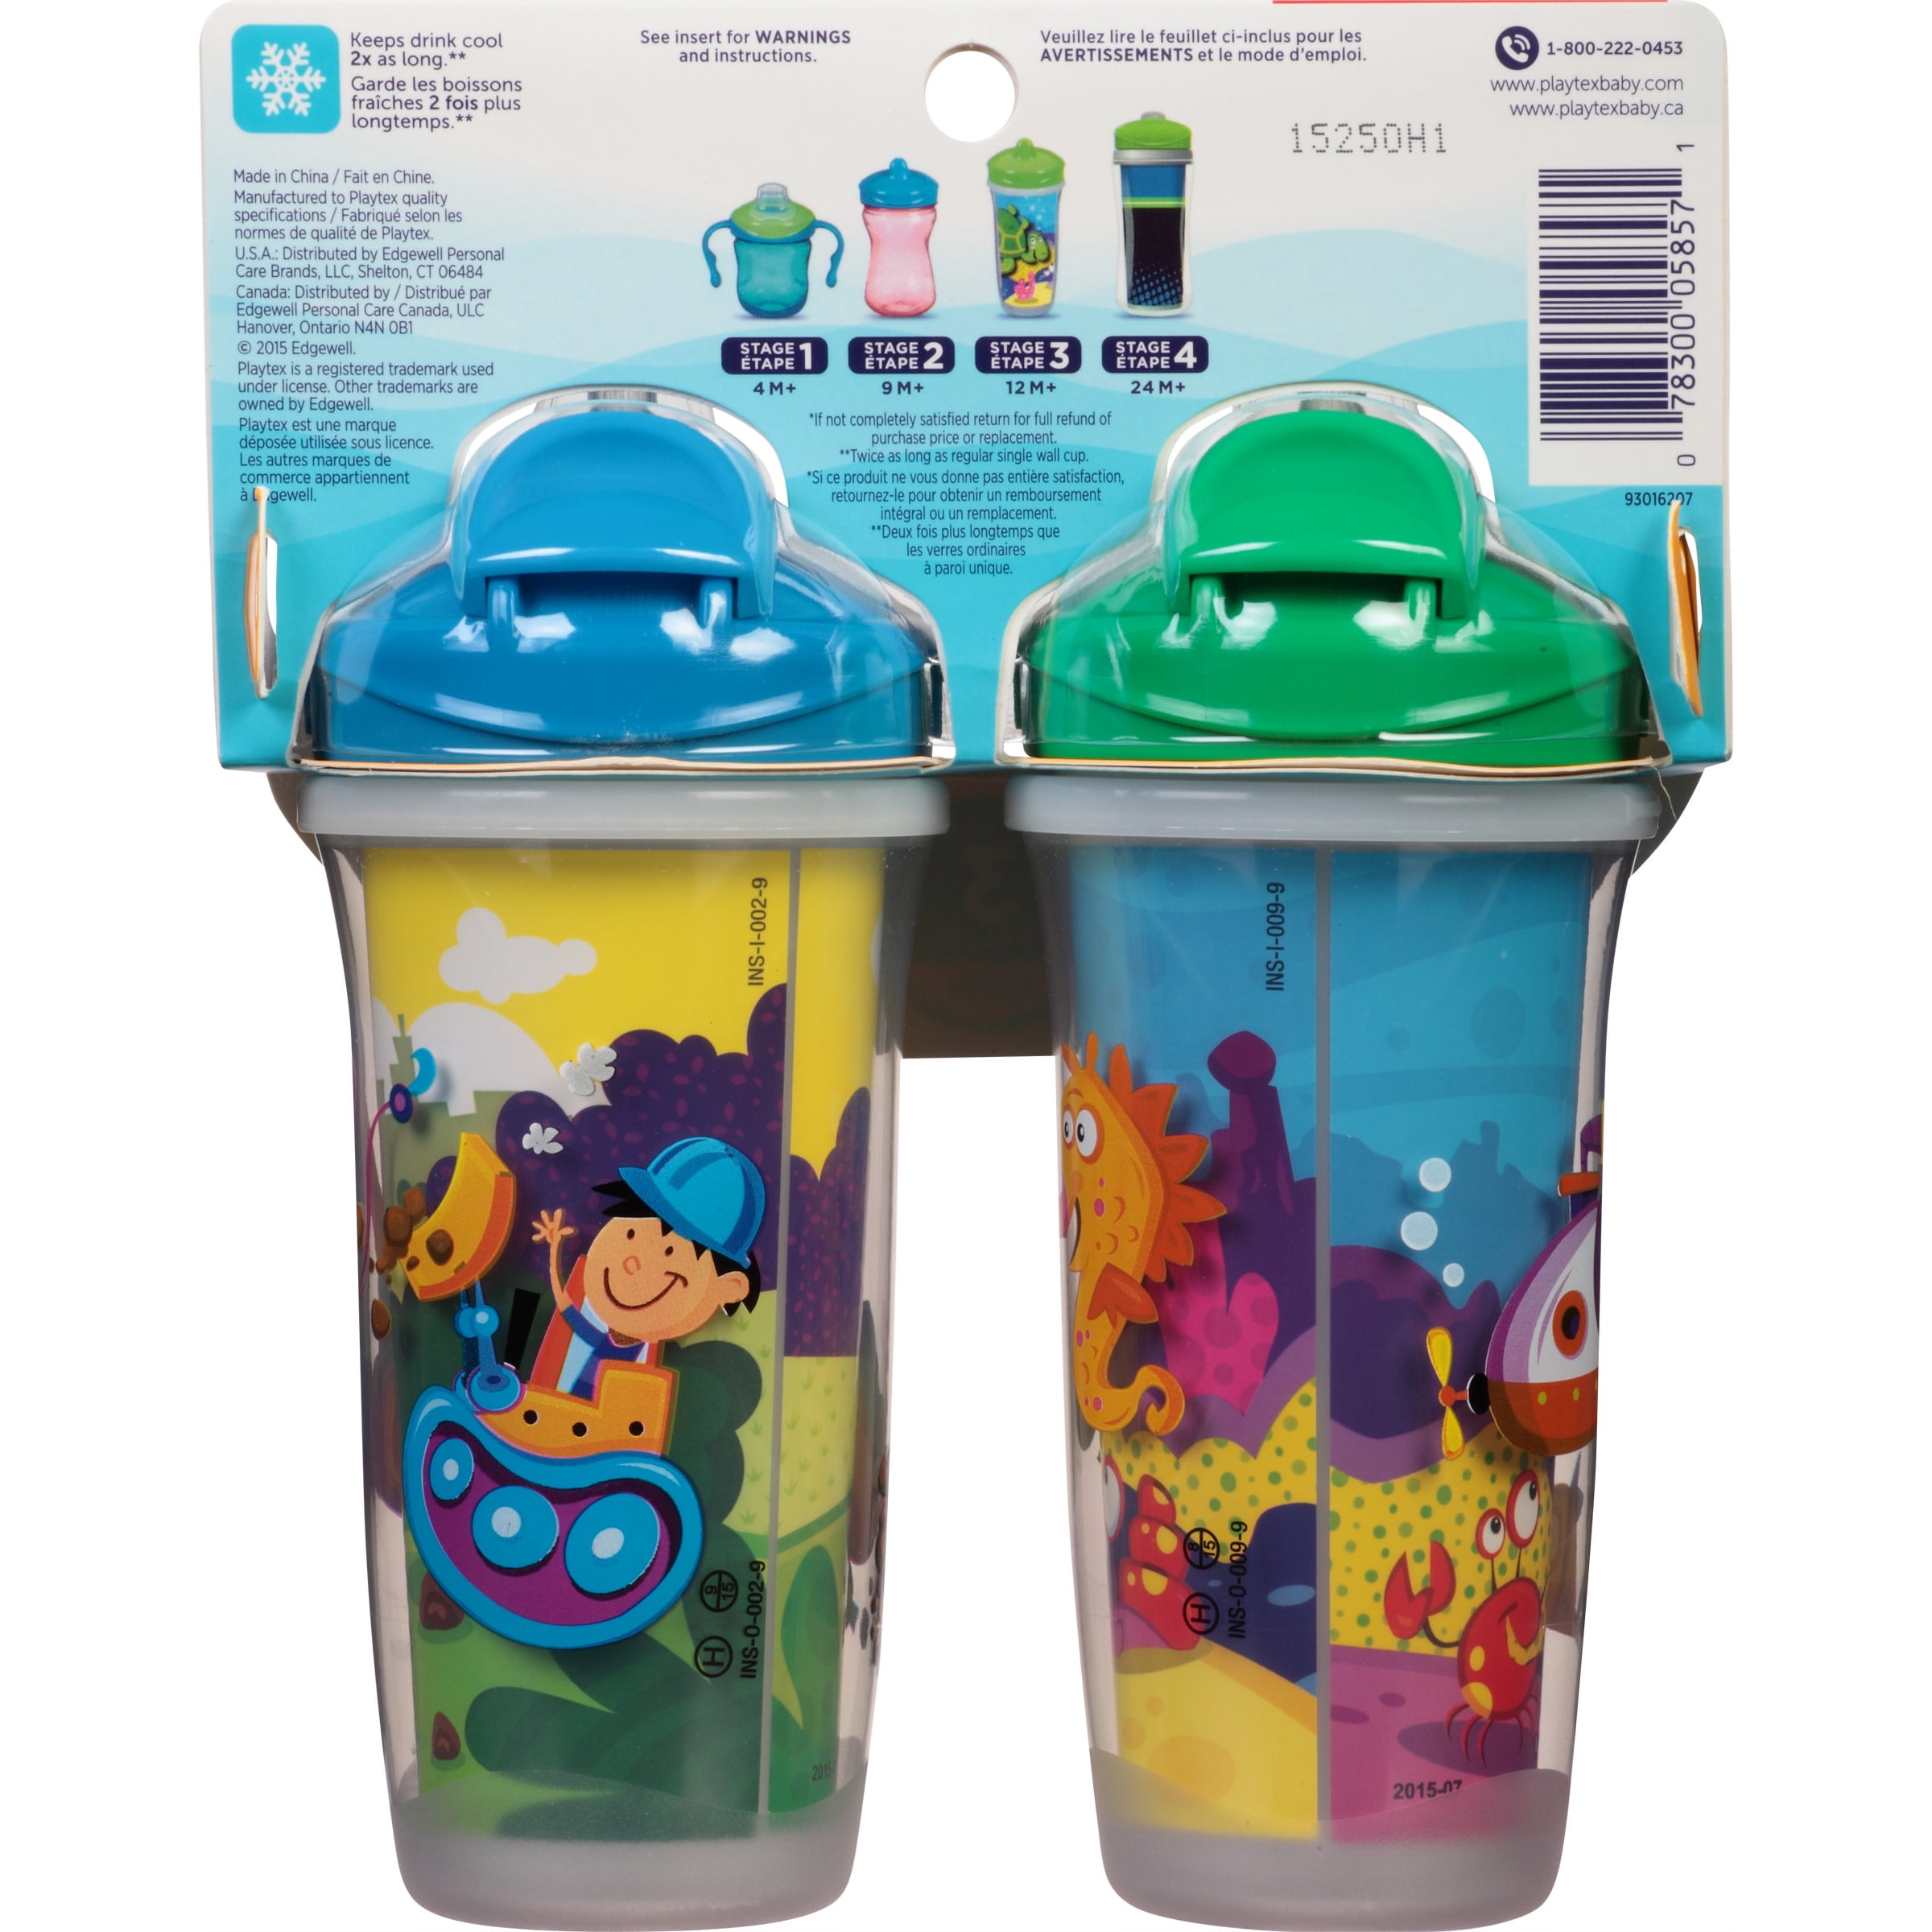 Playtex Sipsters Stage 3 Peppa Pig Insulated Sippy Cup, 9 oz, 2 pk